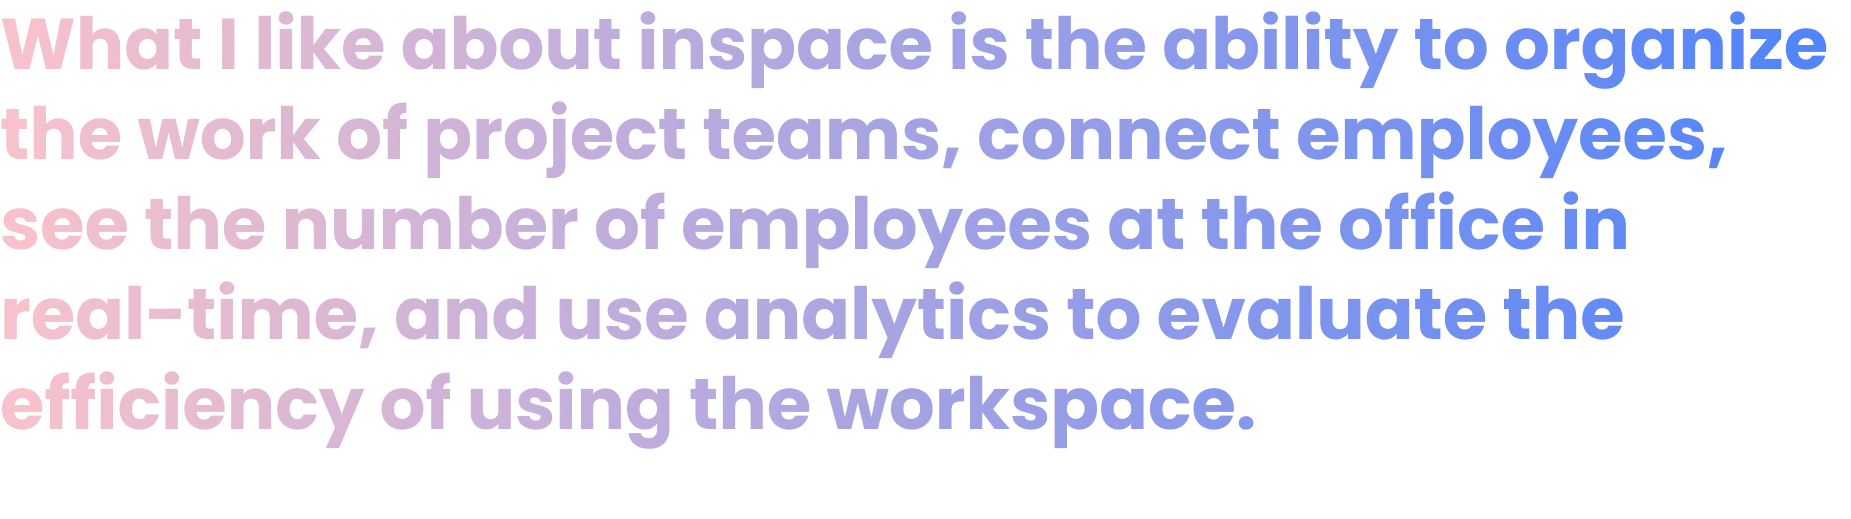 What I like about inspace is the ability to organize the work of project teams, connect employees, see the number of employees at the office in real-time, and use analytics to evaluate the efficiency of using the workspace. Vasily Miropolsky CBDO, Aurora Group